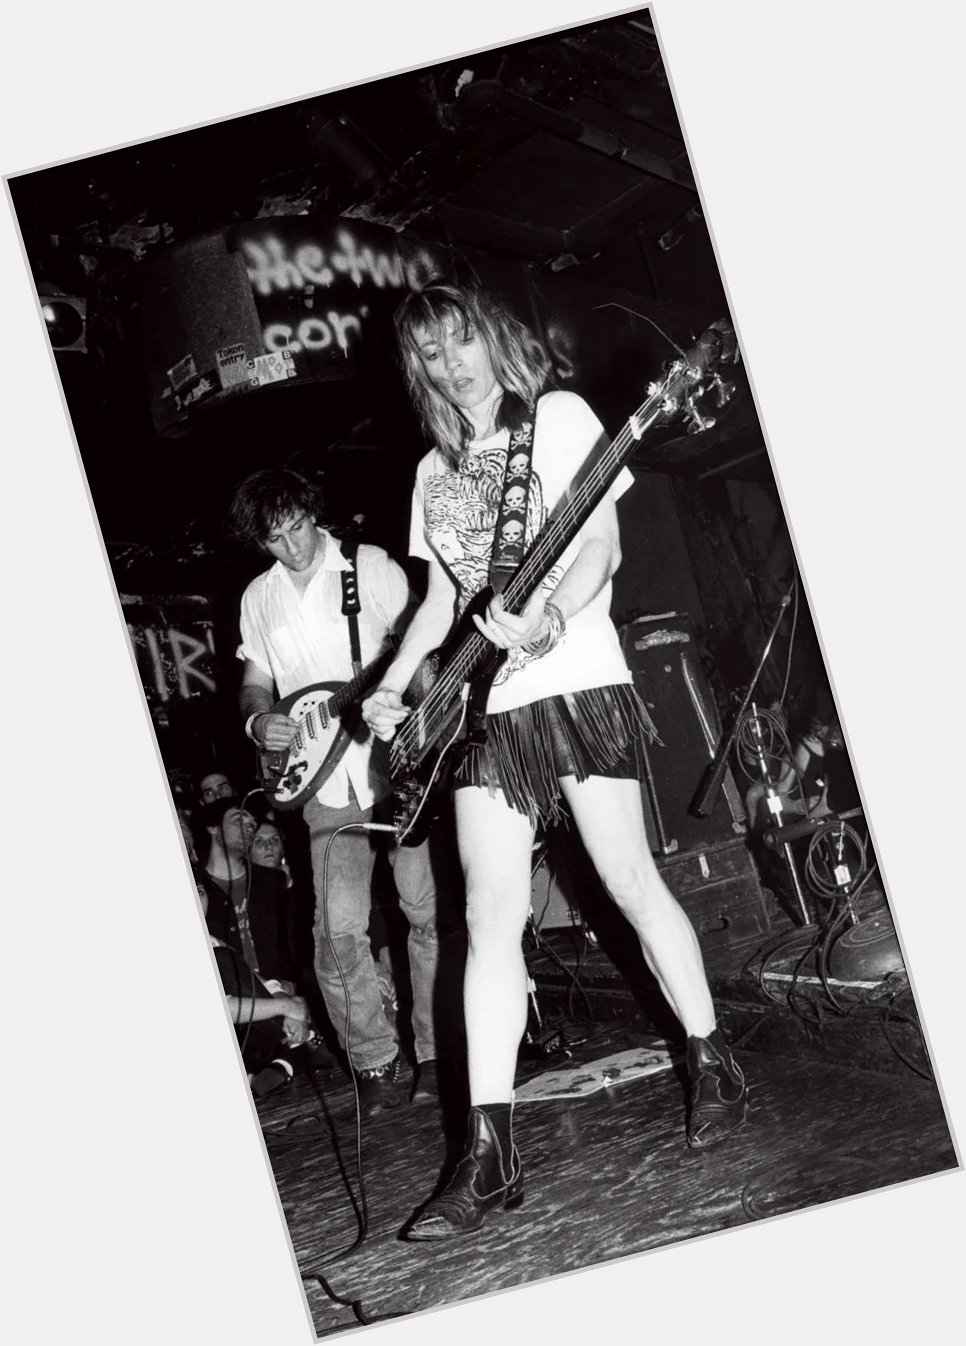  People pay money to see others believe in themselves. Happy Birthday, Kim Gordon! 